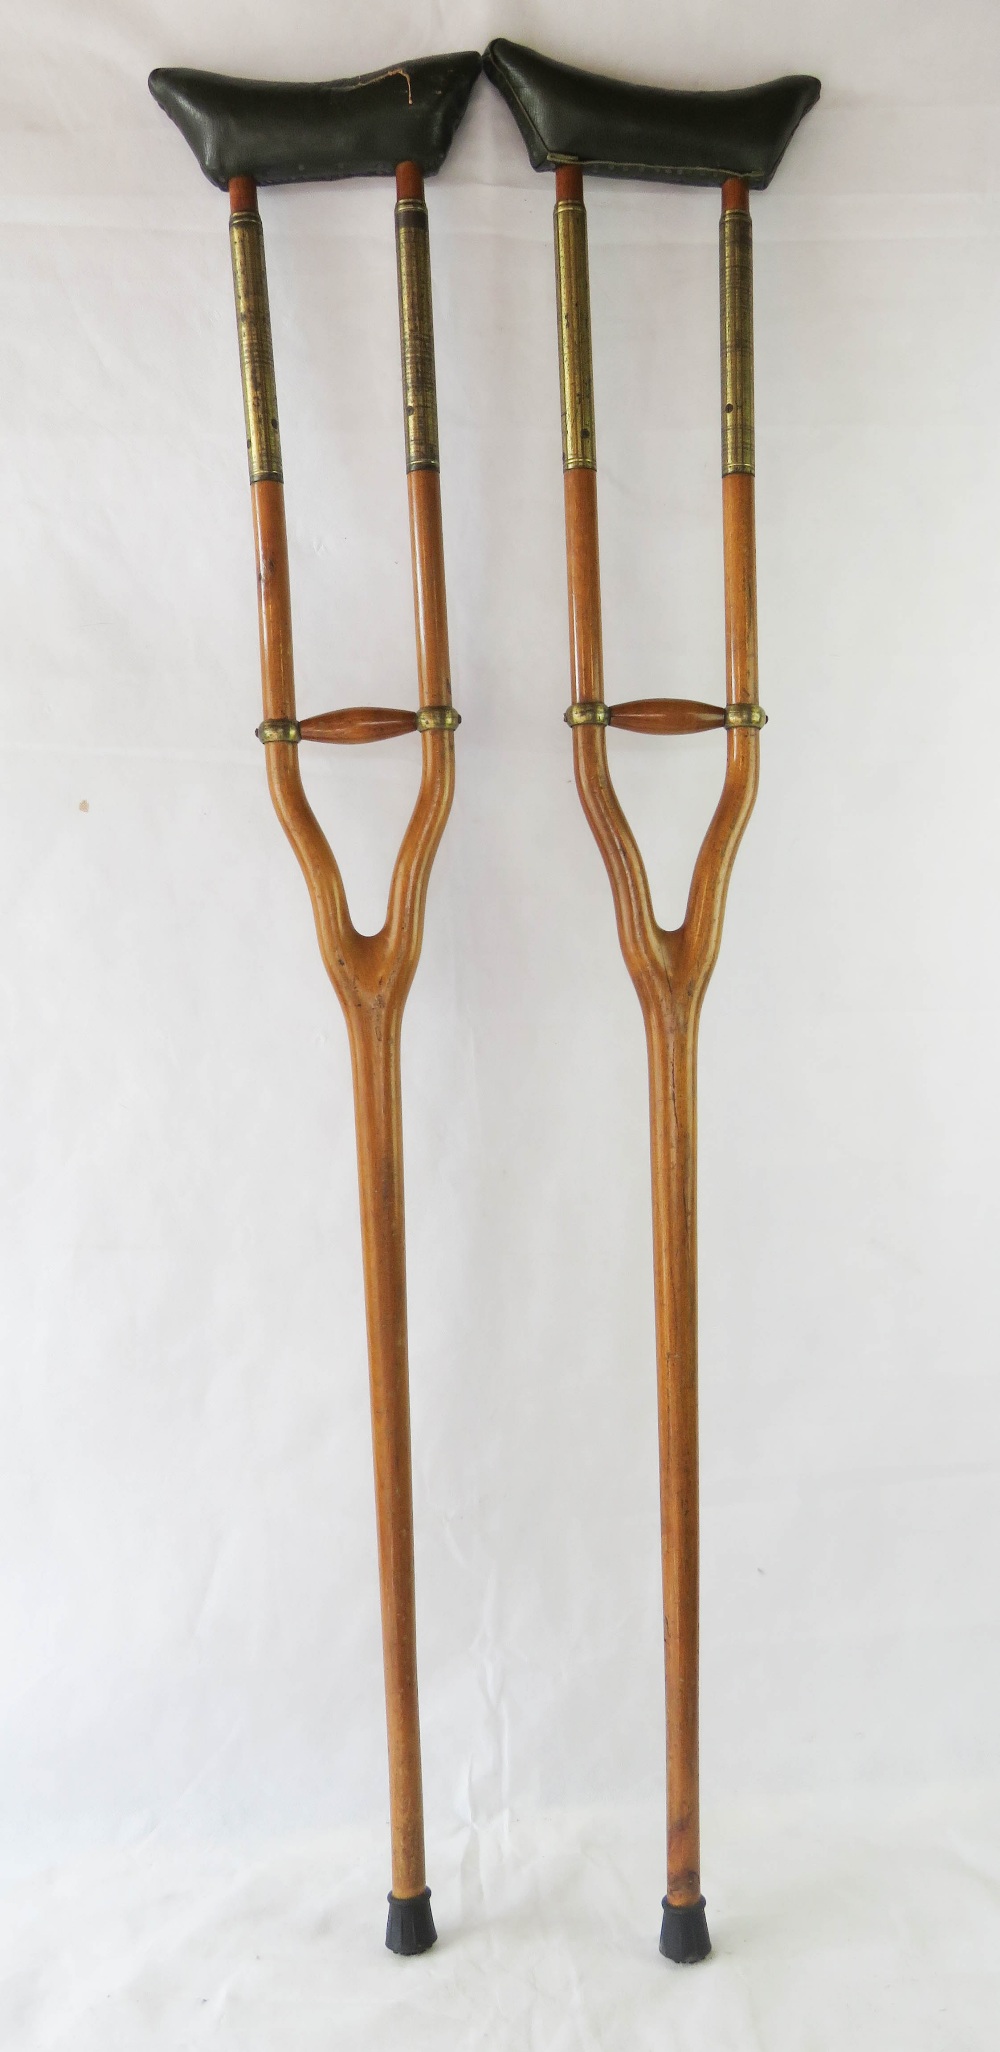 A pair of vintage brass mounted crutches, with sprung leather supports.